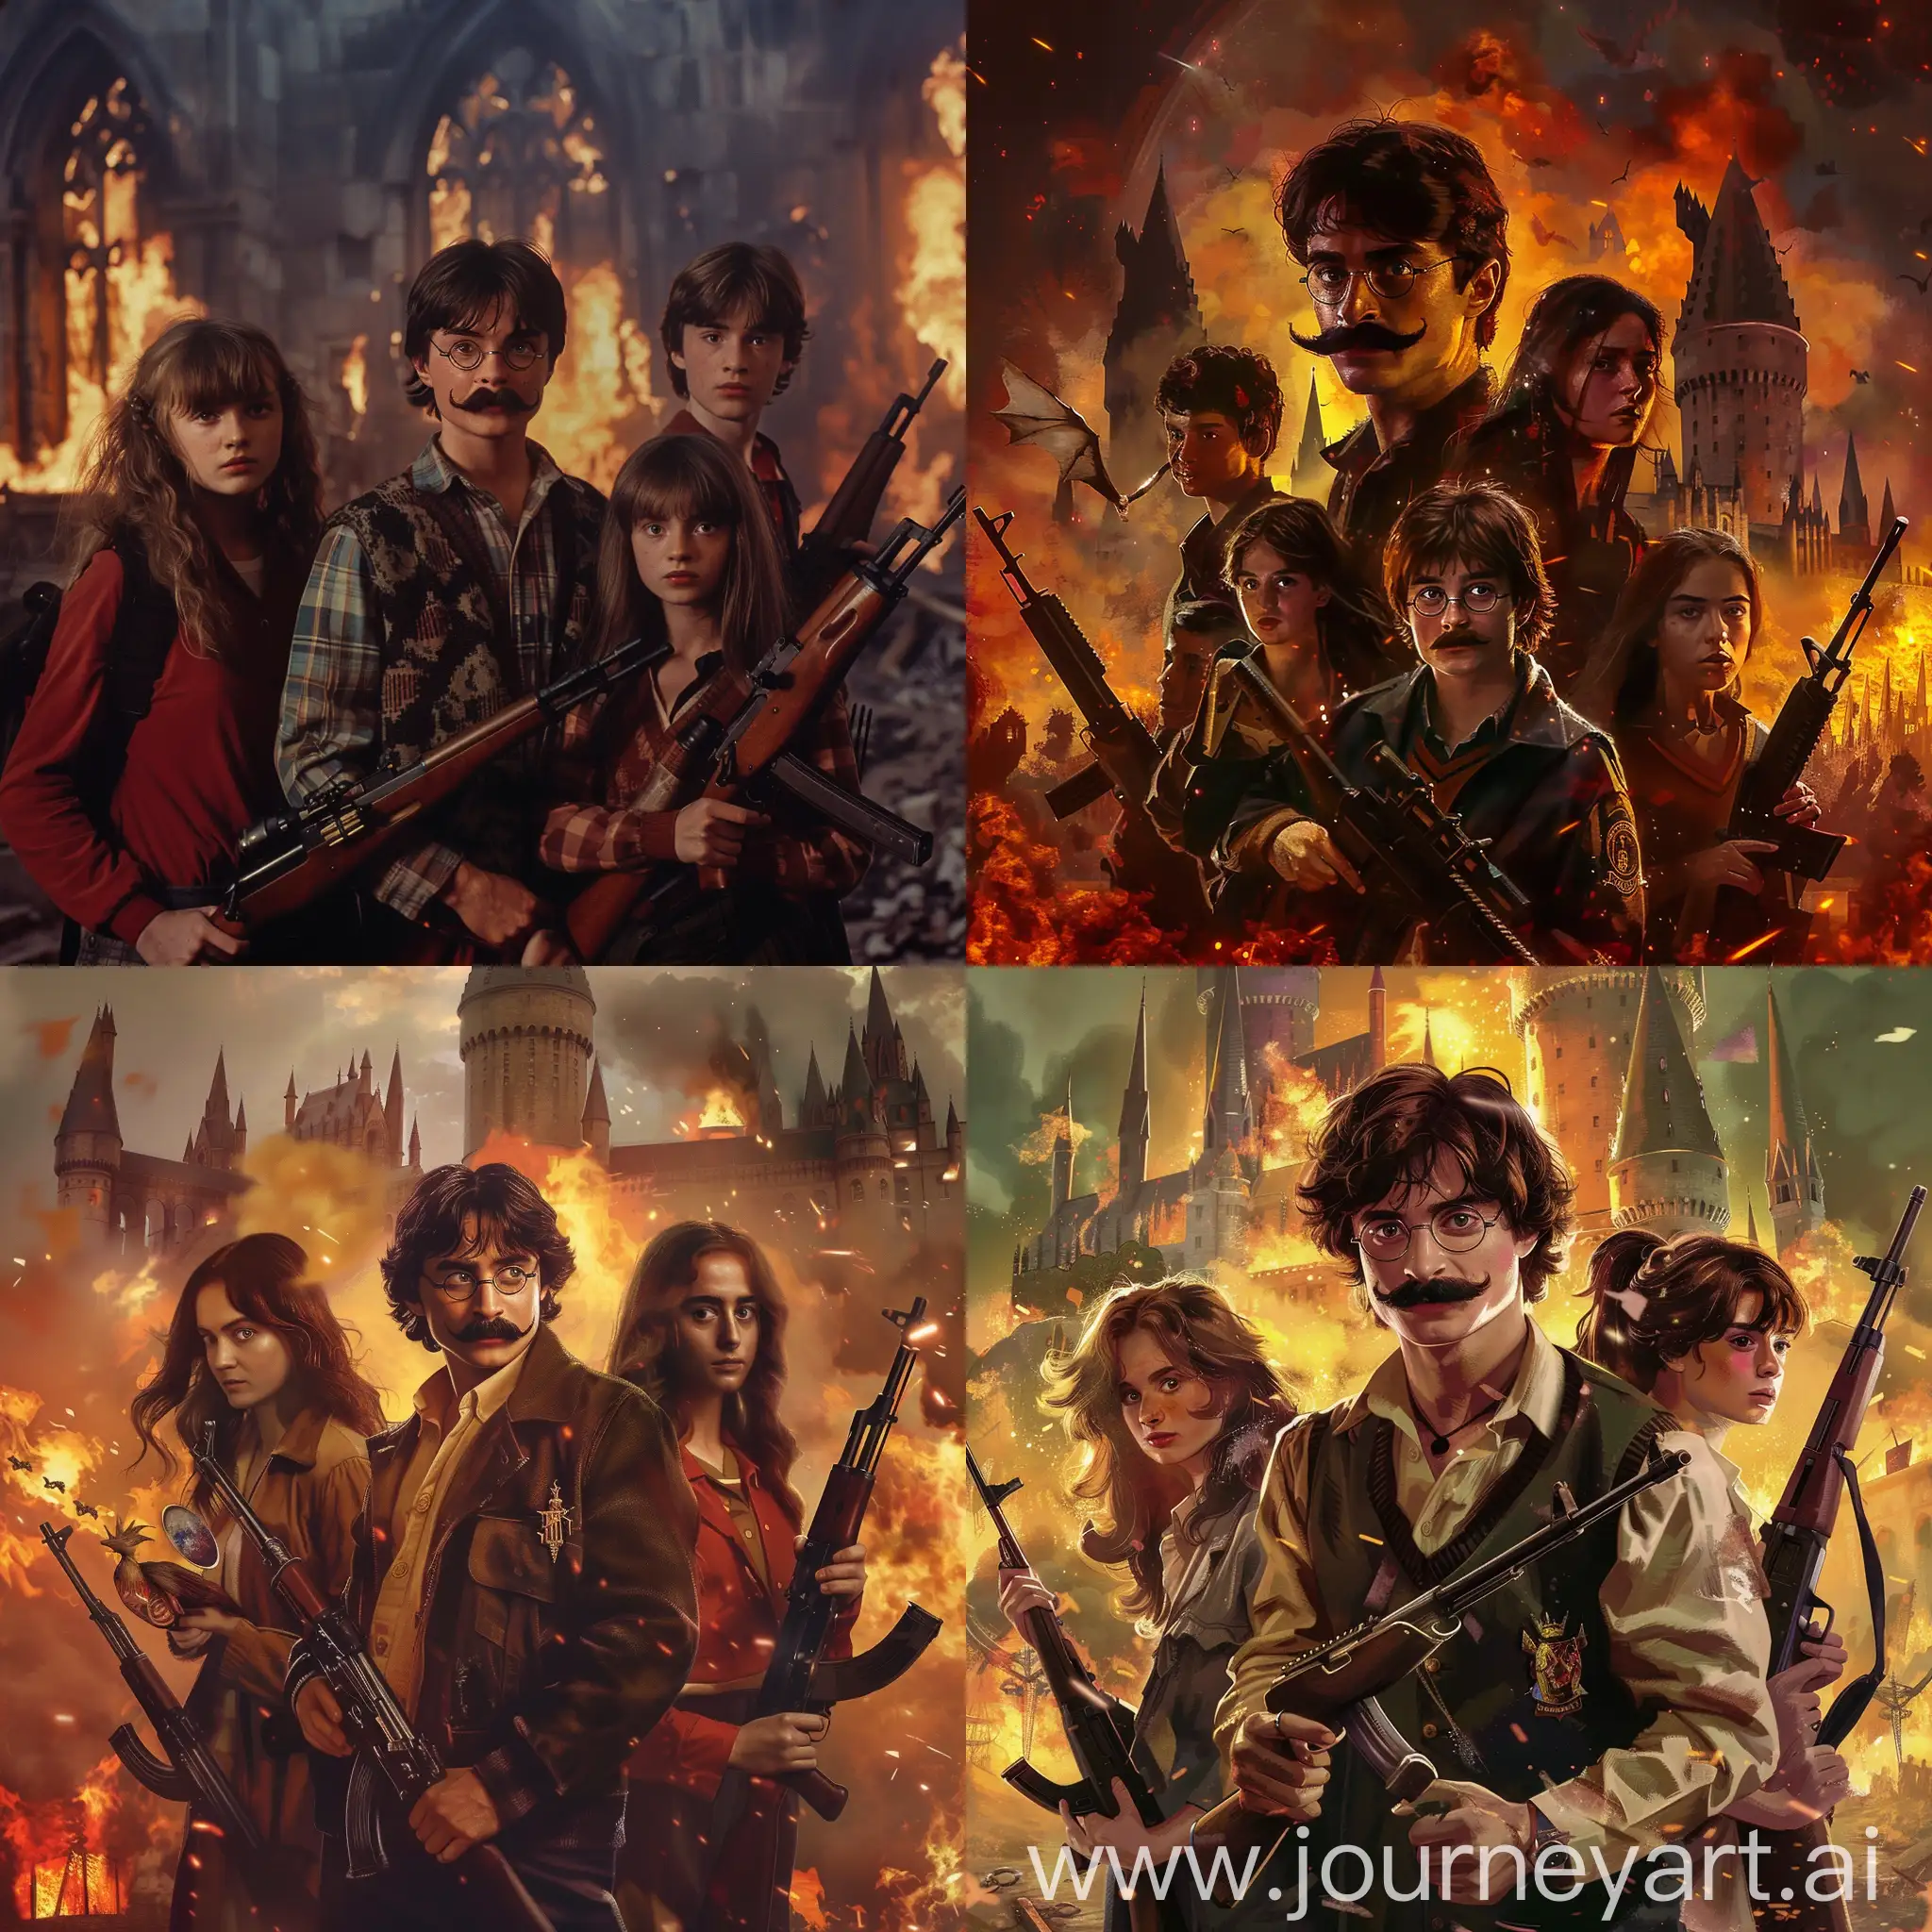 Wizard-Trio-with-Rifles-Defending-Hogwarts-from-Fire